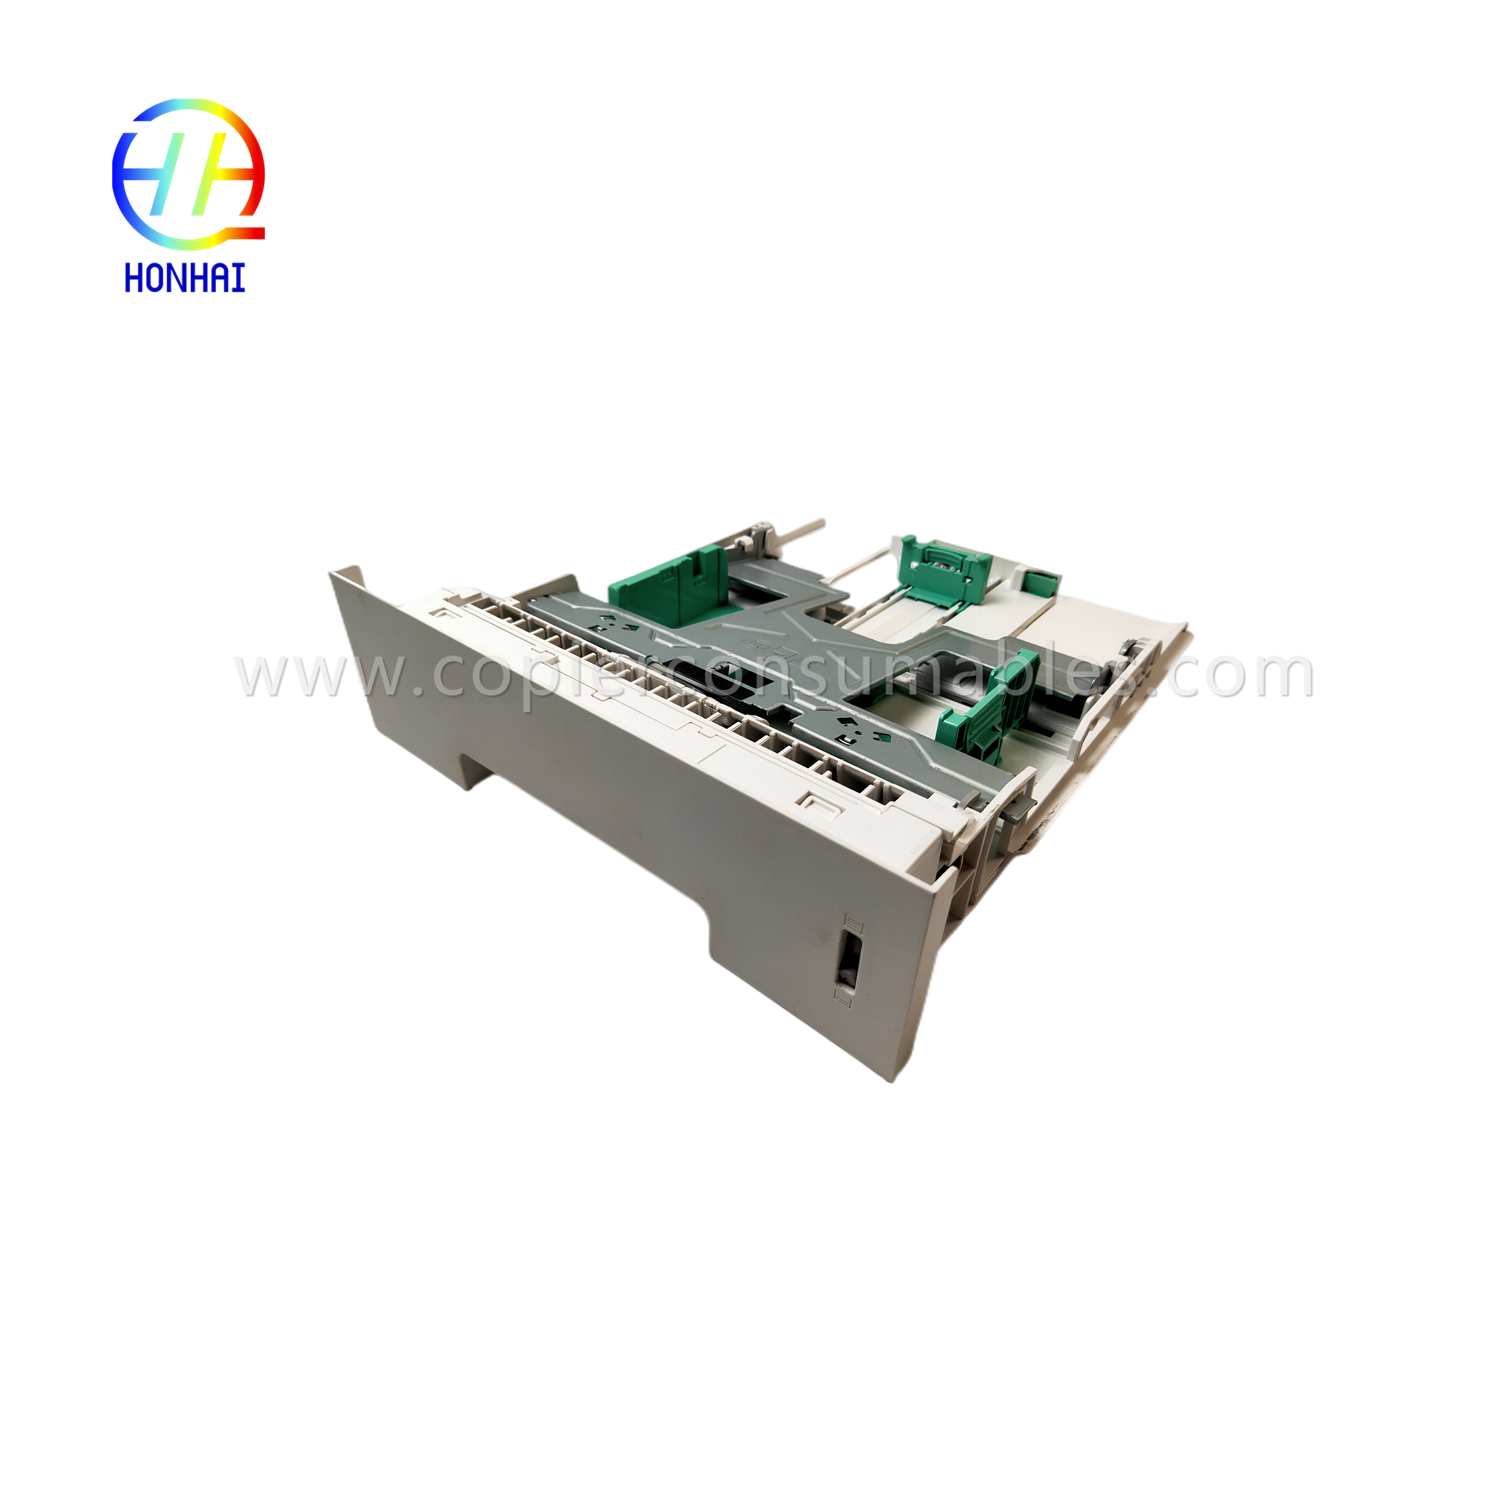 https://c585.goodao.net/paper-tray-assembly-for-xerox-phaser-3320dni-workcentre-3315dn-3325dni-050n00650